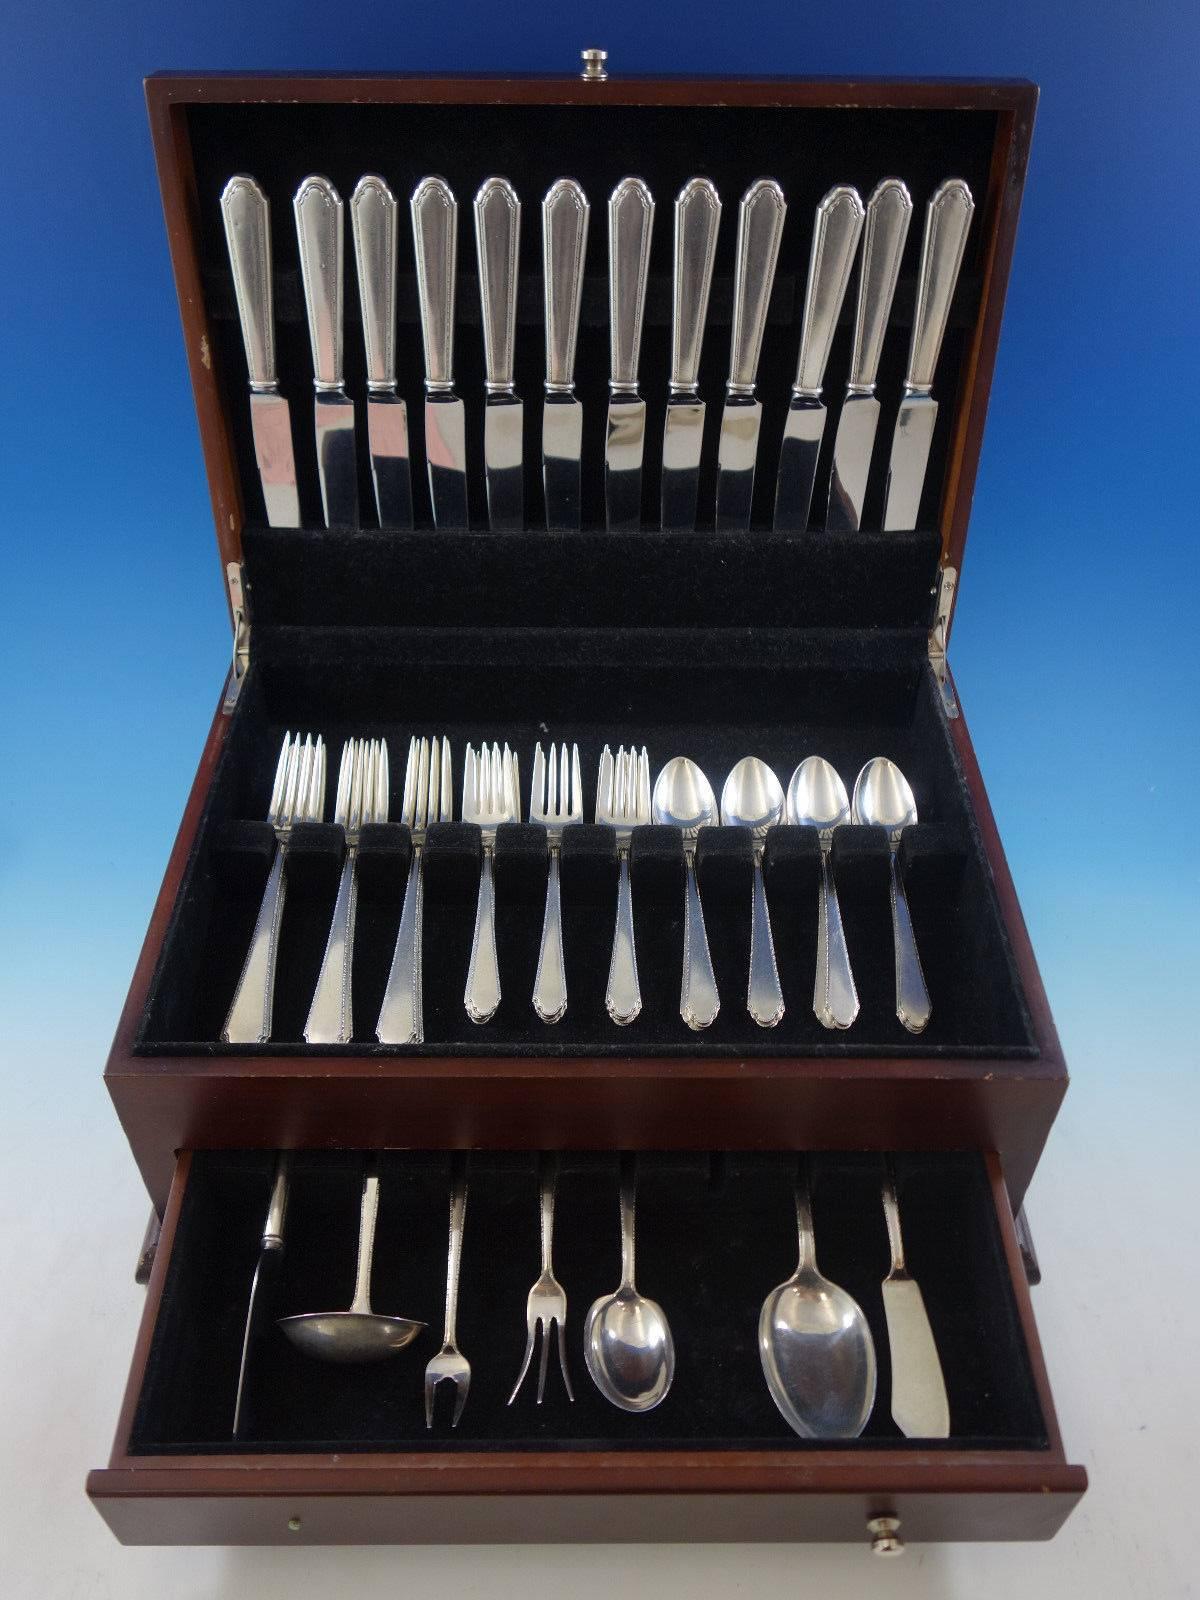 William and Mary by Lunt sterling silver flatware set of 55 pieces. This set includes: 

12 knives, 9